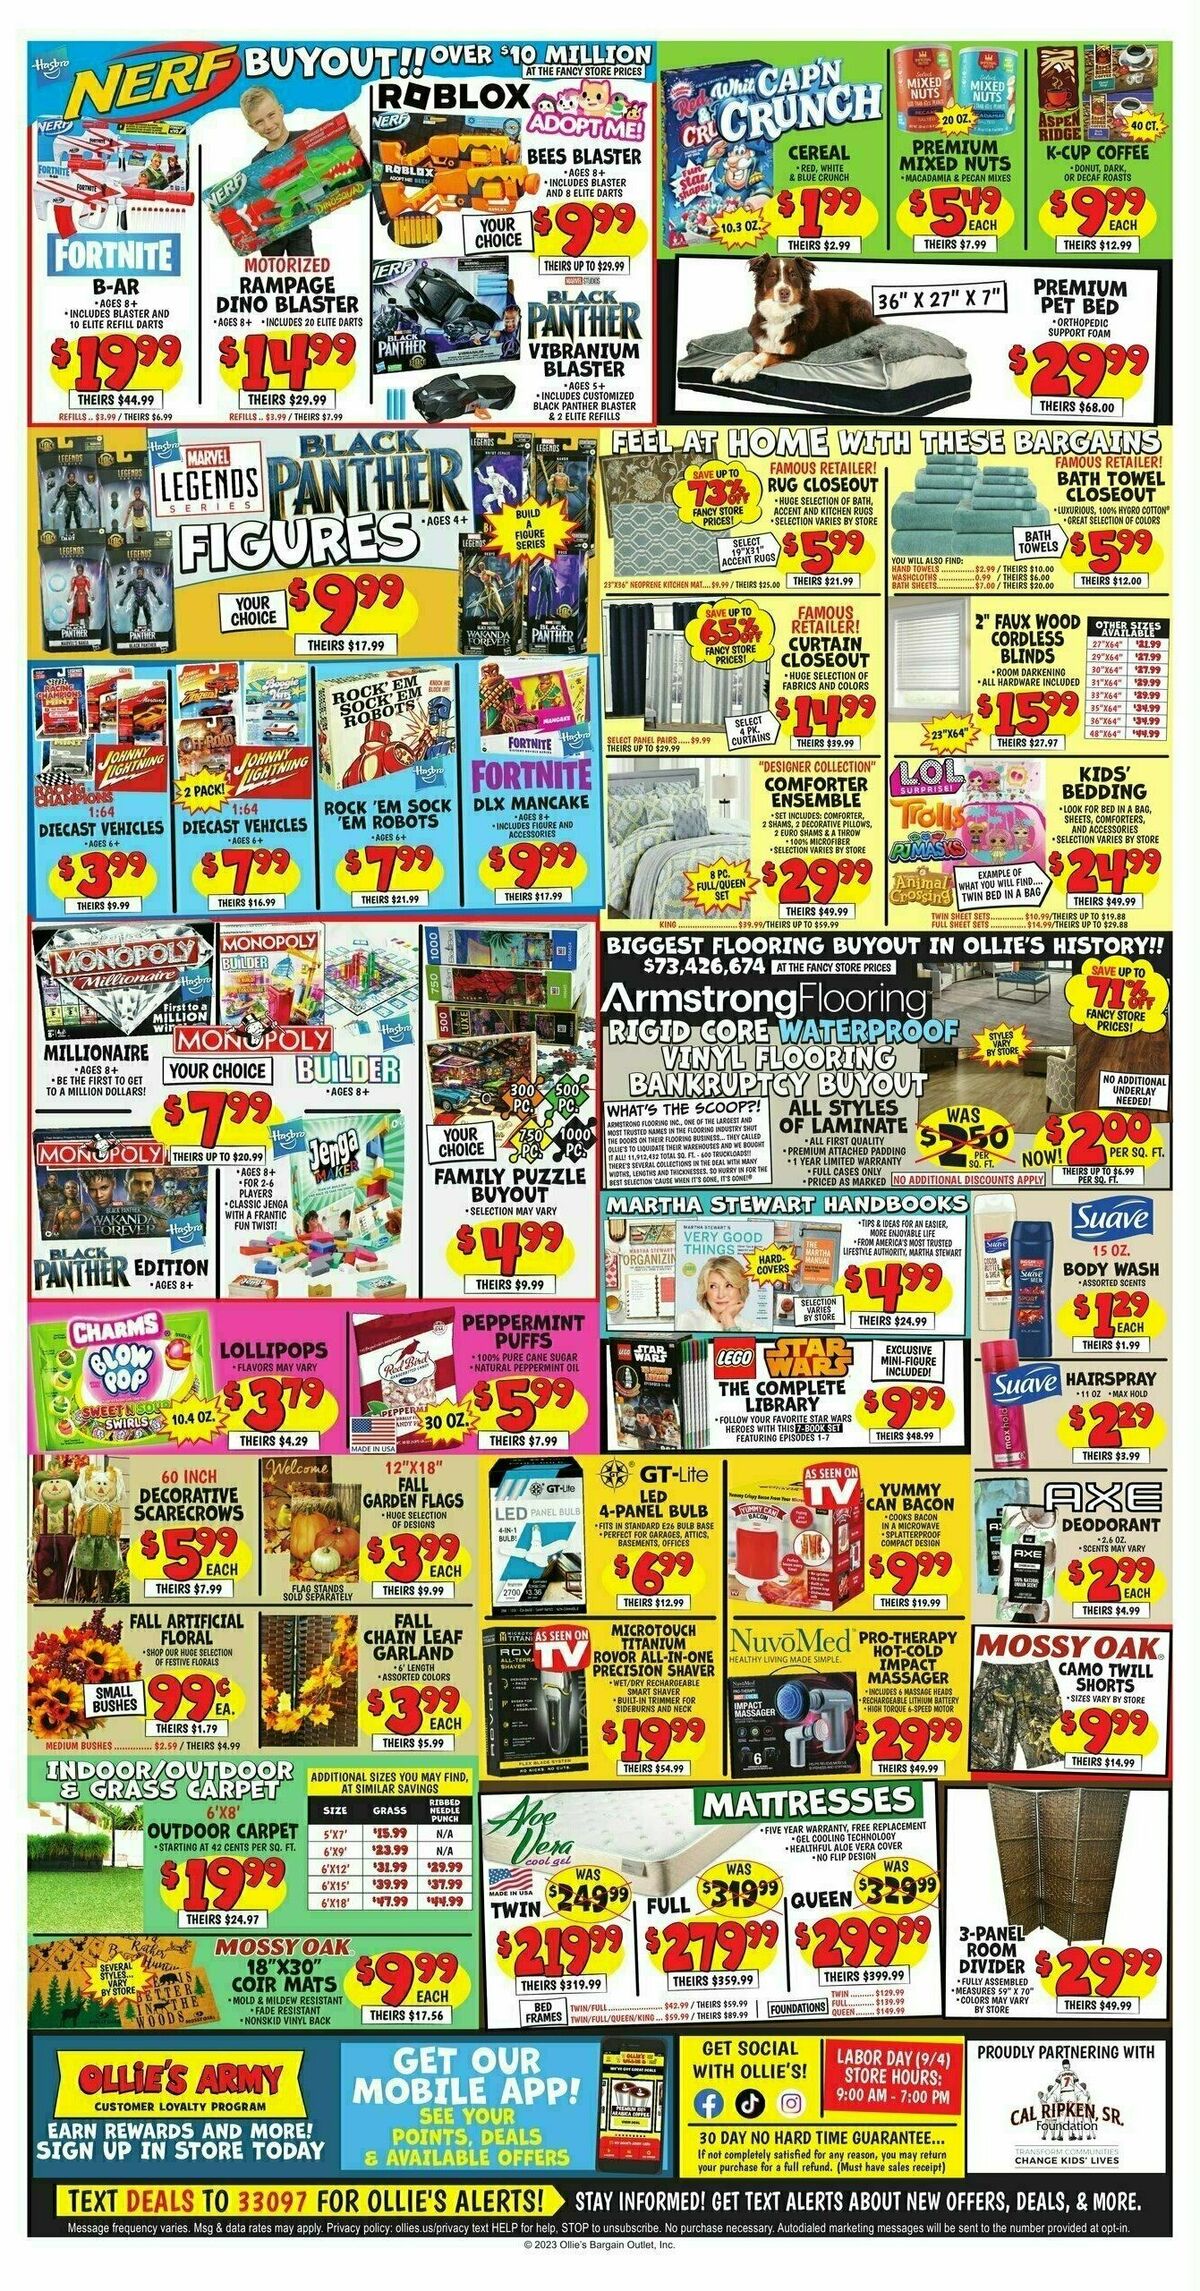 Ollie's Bargain Outlet Weekly Ad from August 30